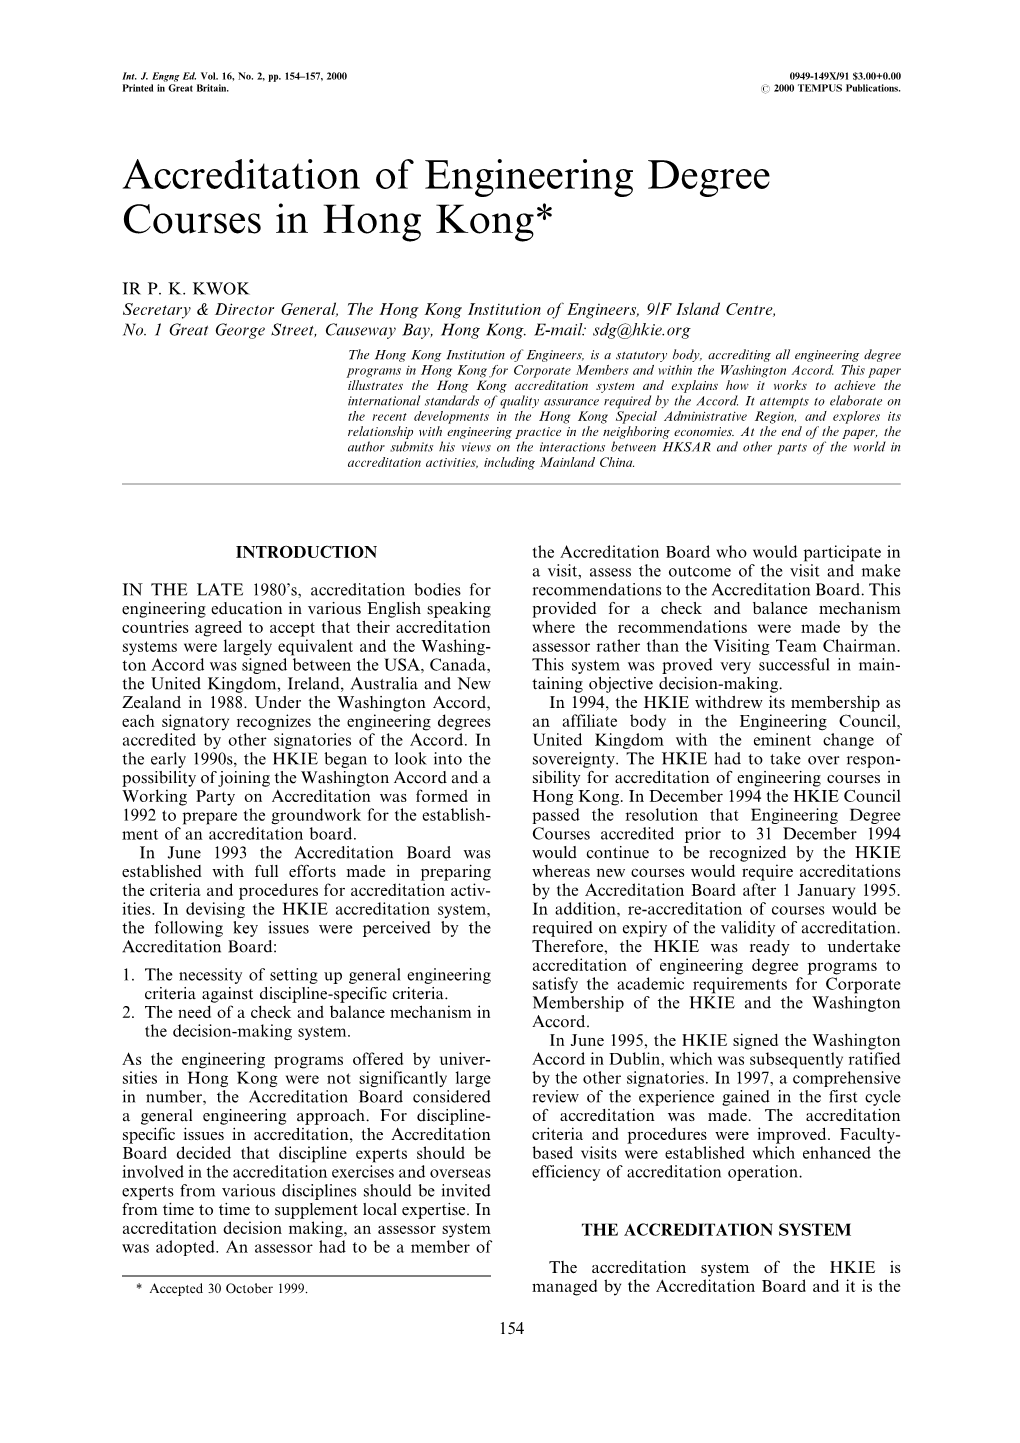 Accreditation of Engineering Degree Courses in Hong Kong*